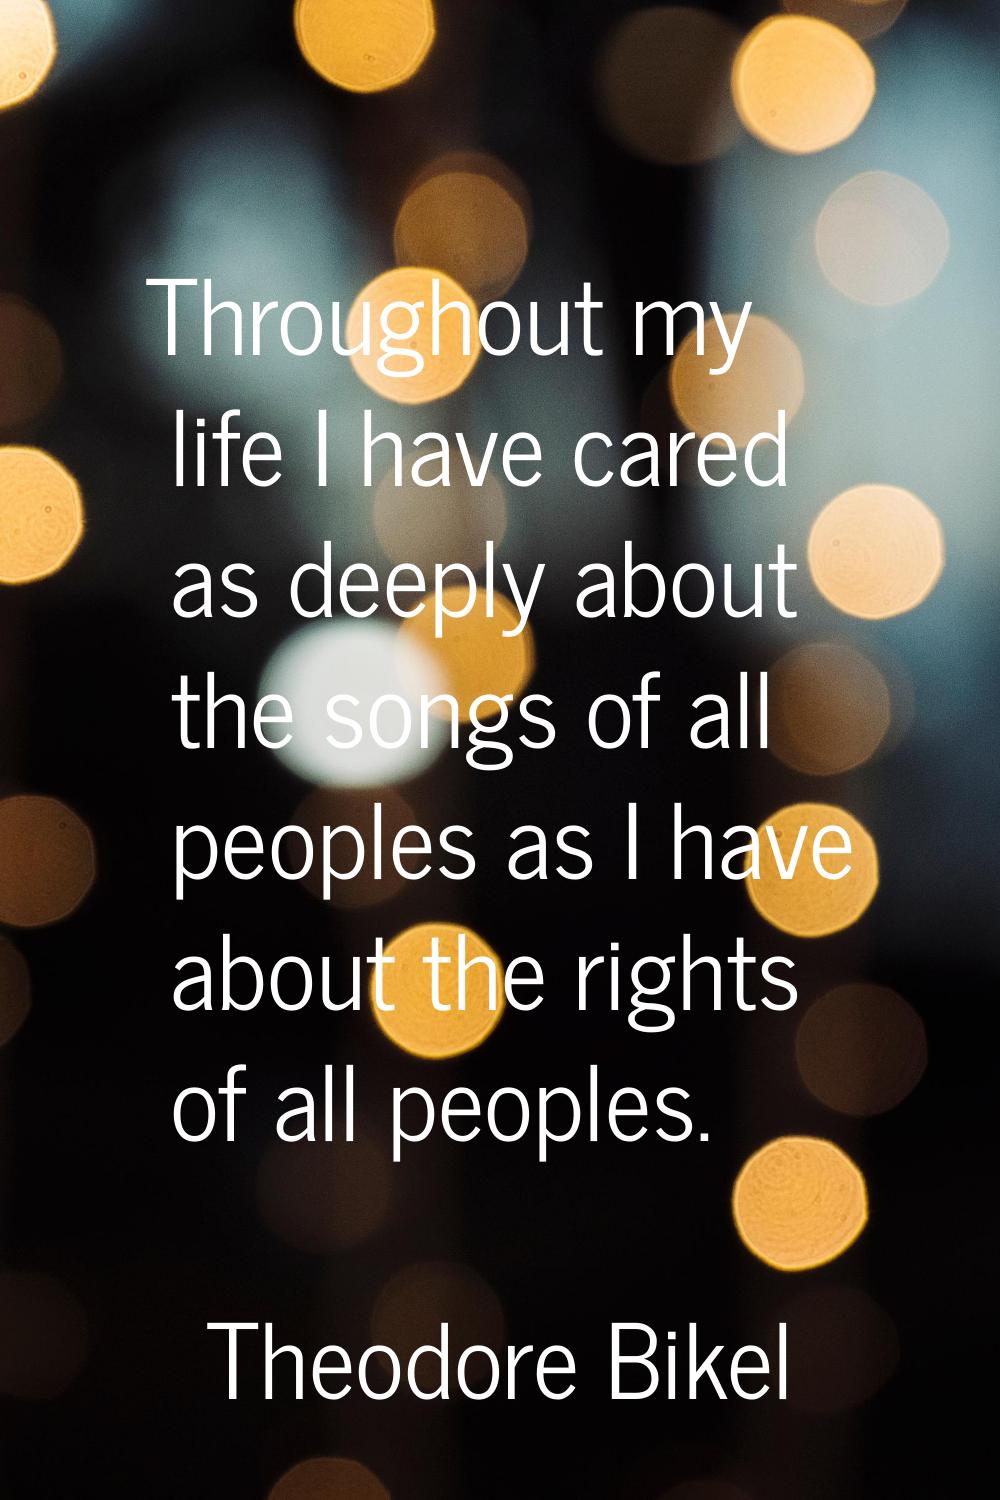 Throughout my life I have cared as deeply about the songs of all peoples as I have about the rights